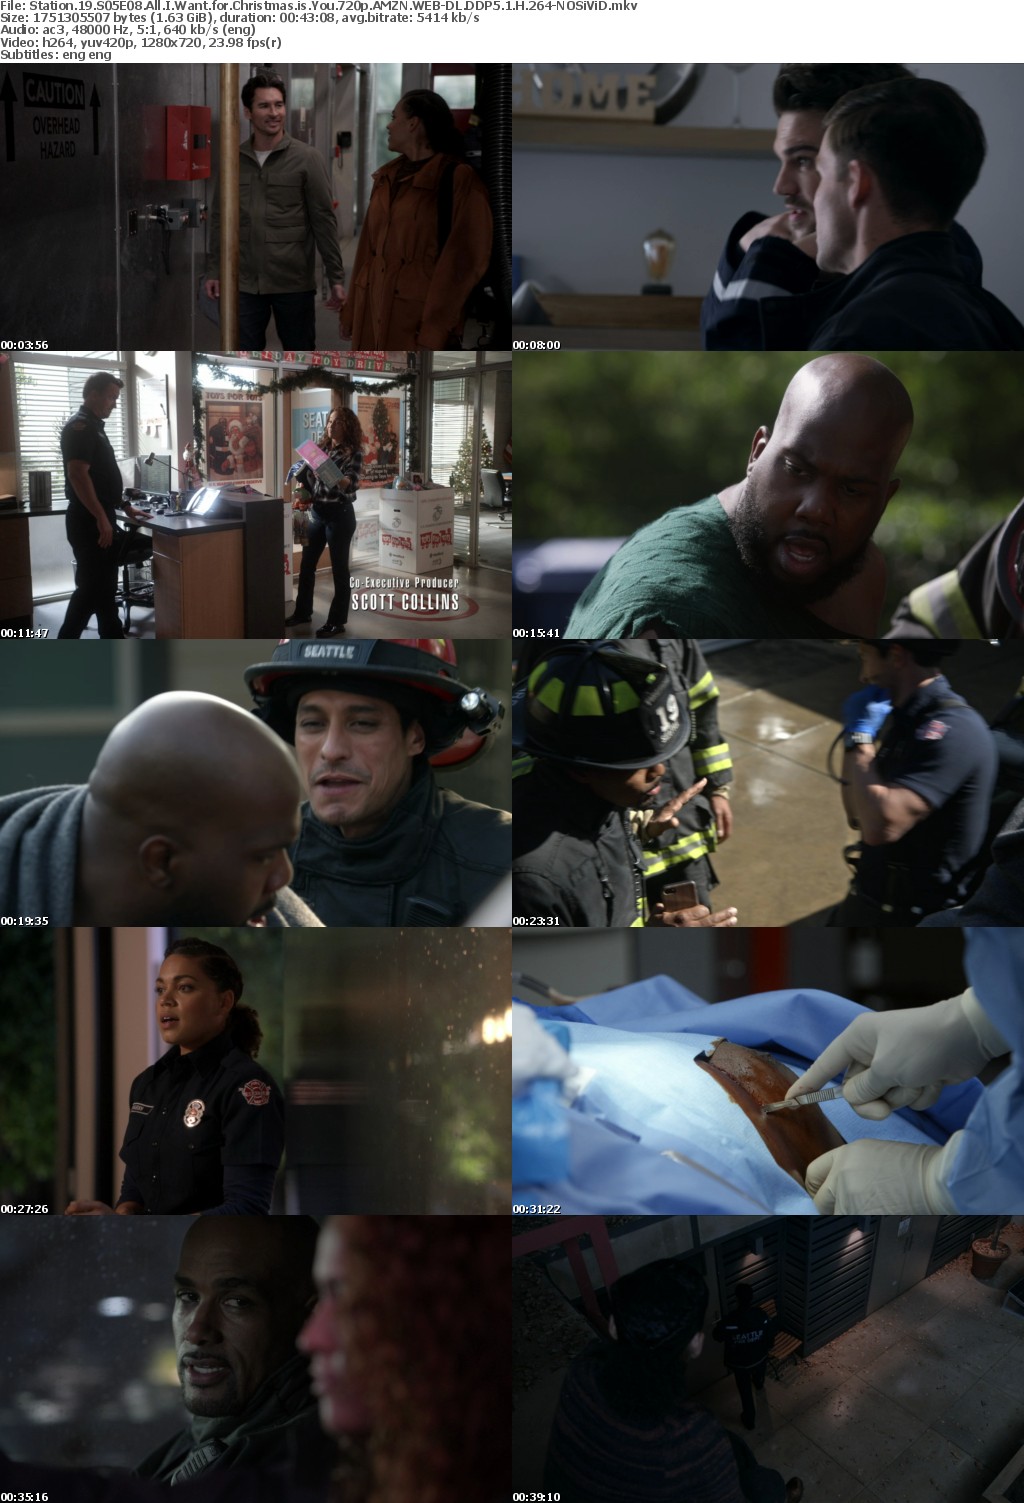 Station 19 S05E08 All I Want for Christmas is You 720p AMZN WEBRip DDP5 1 x264-NOSiViD